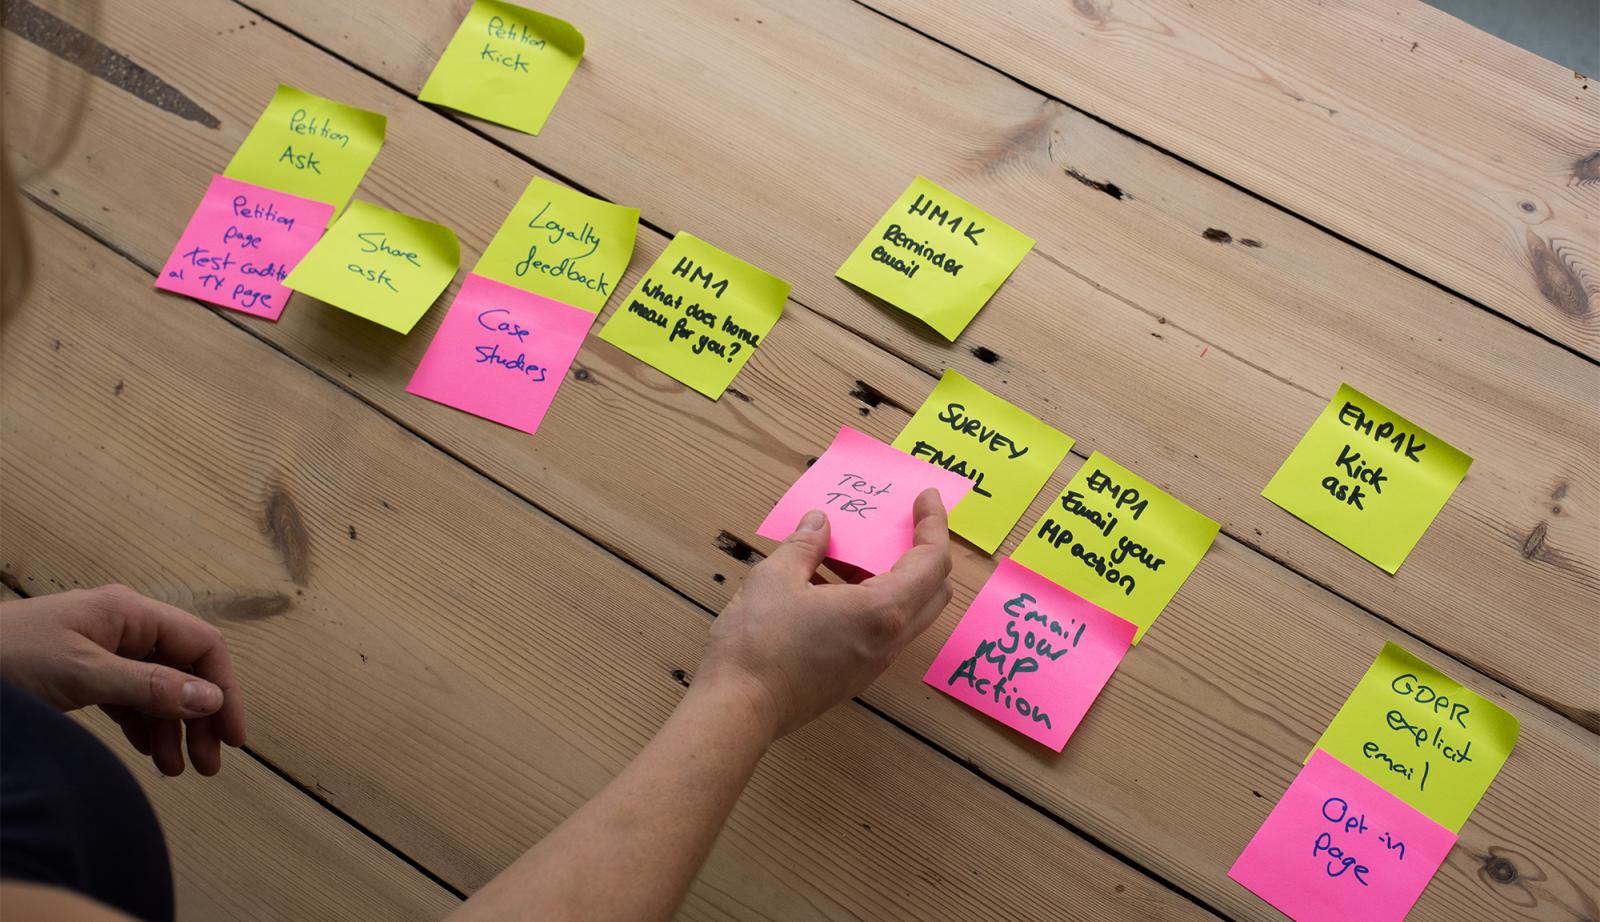 Emails are mapped out using sticky notes